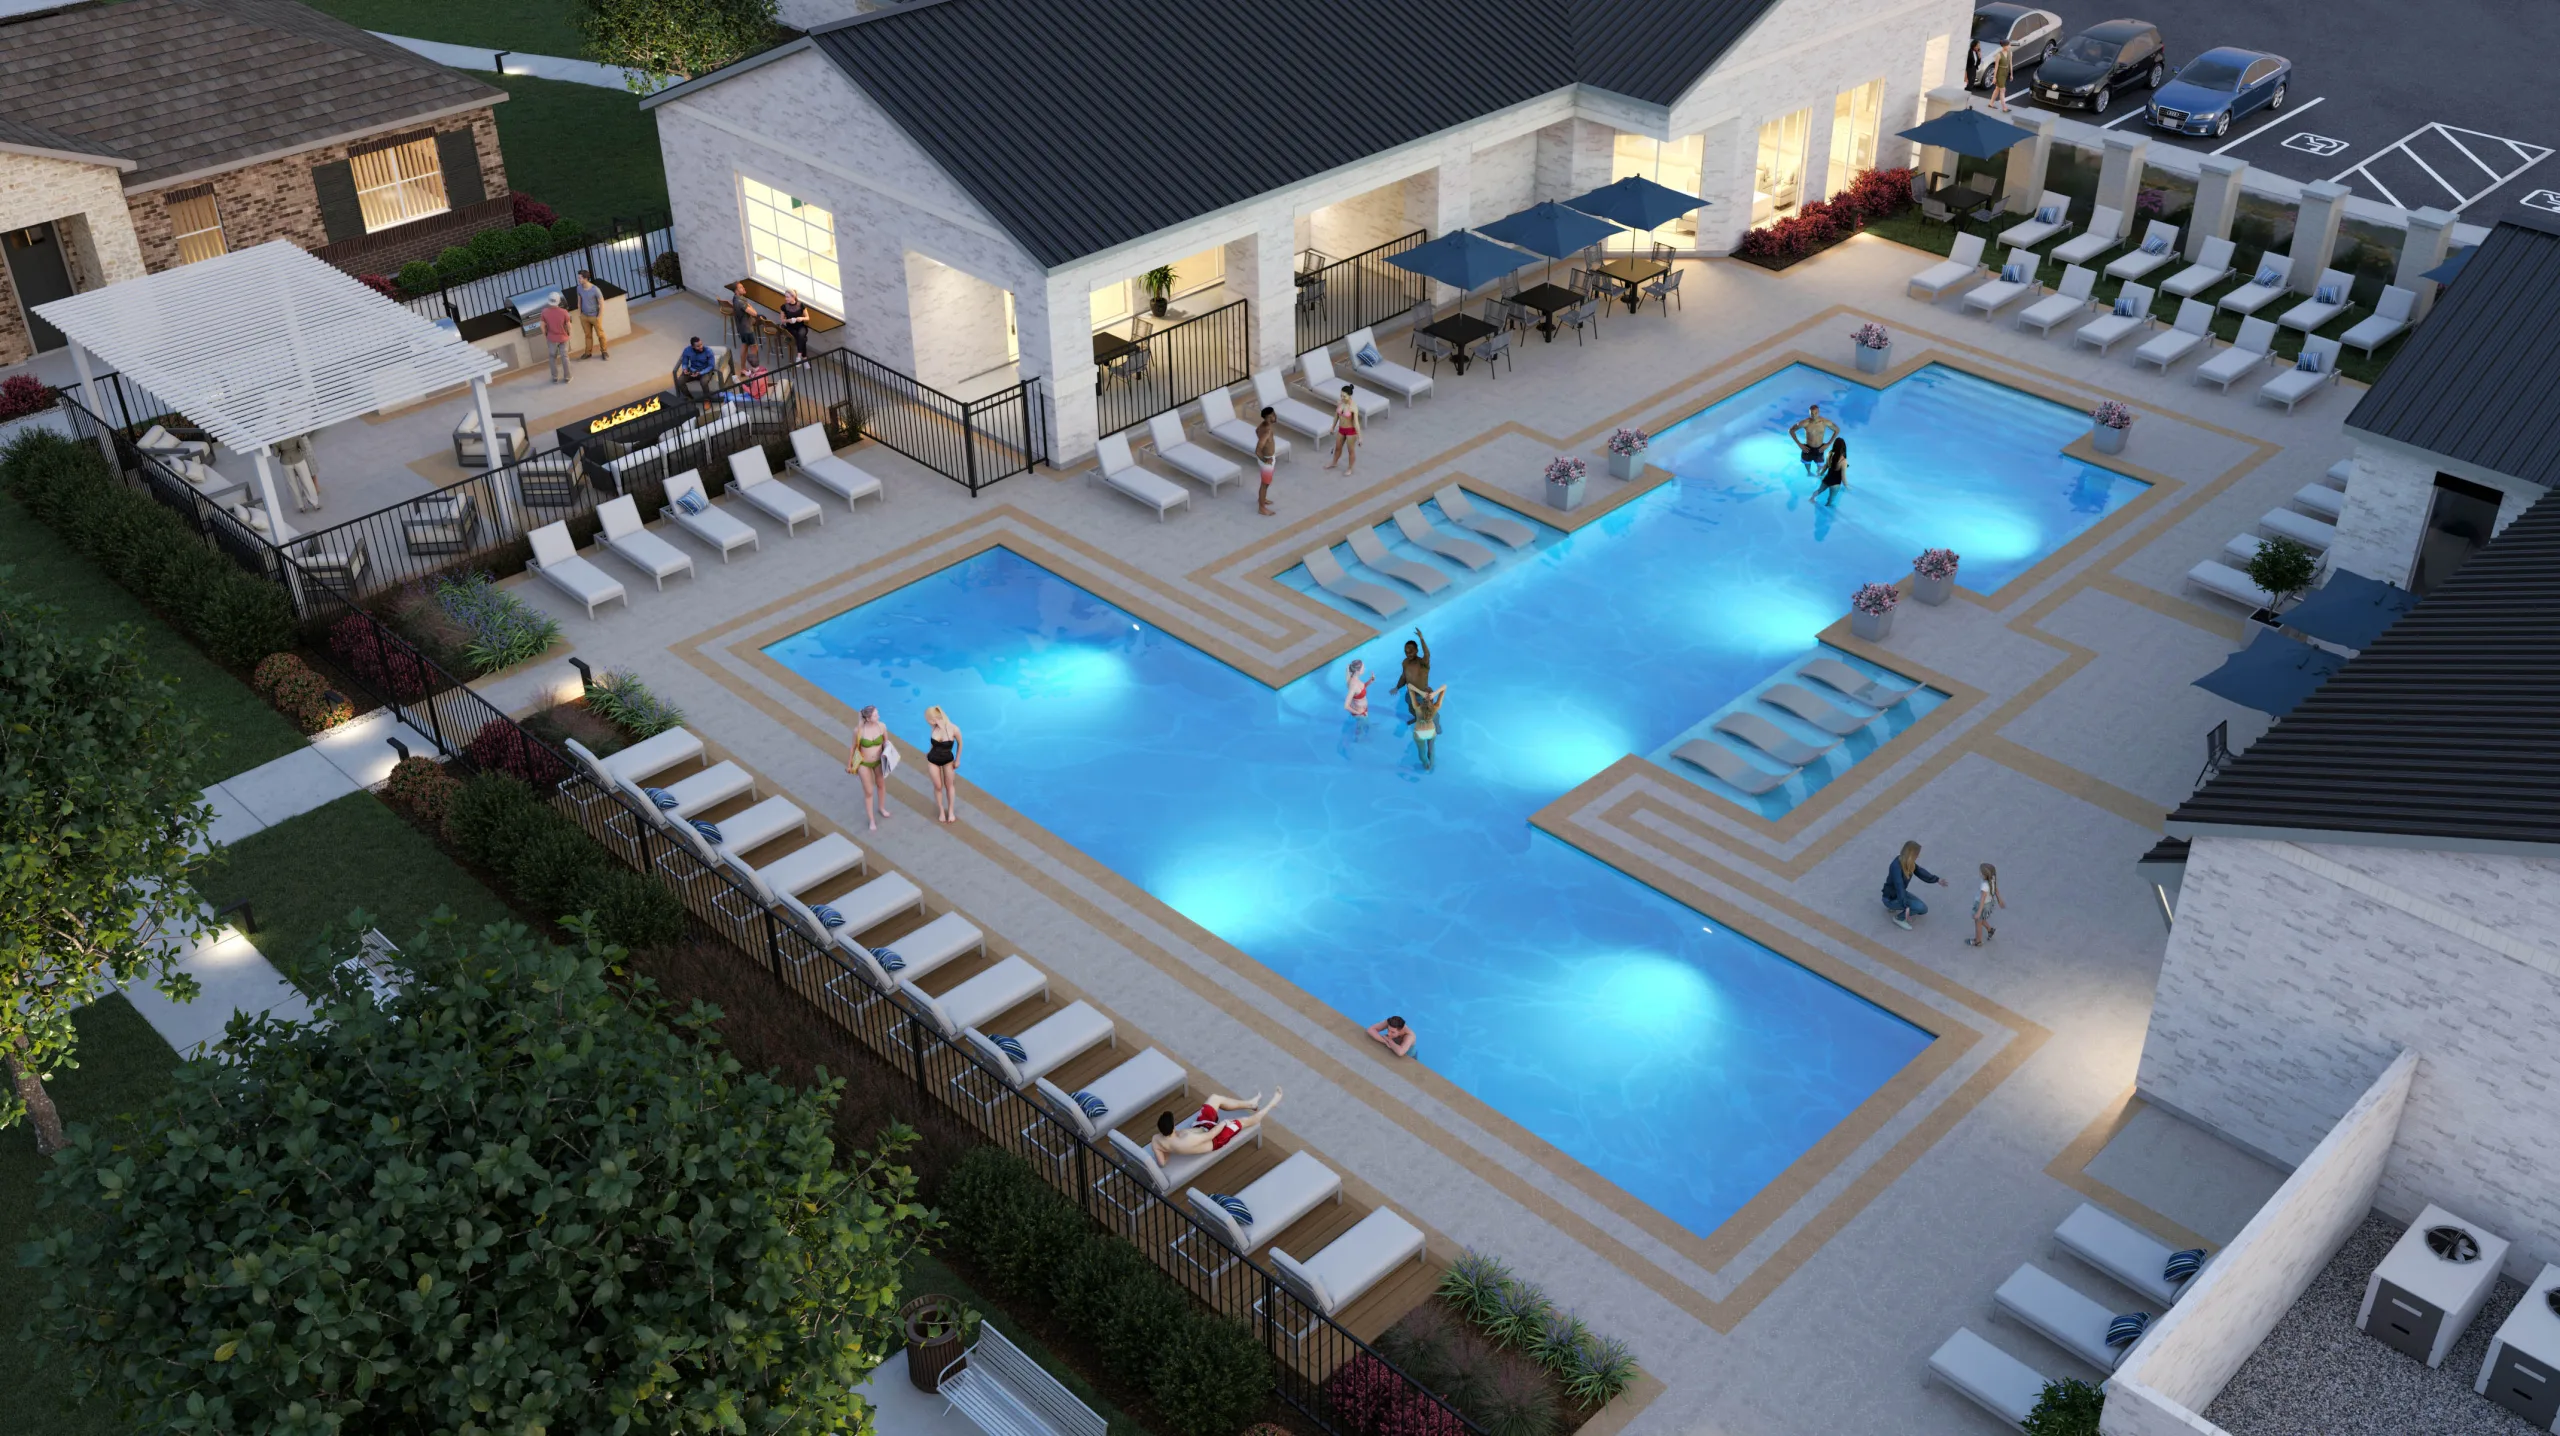 One-story homes for rent with private backyards near Dallas, TX. Rendering of pool from arial view at dusk